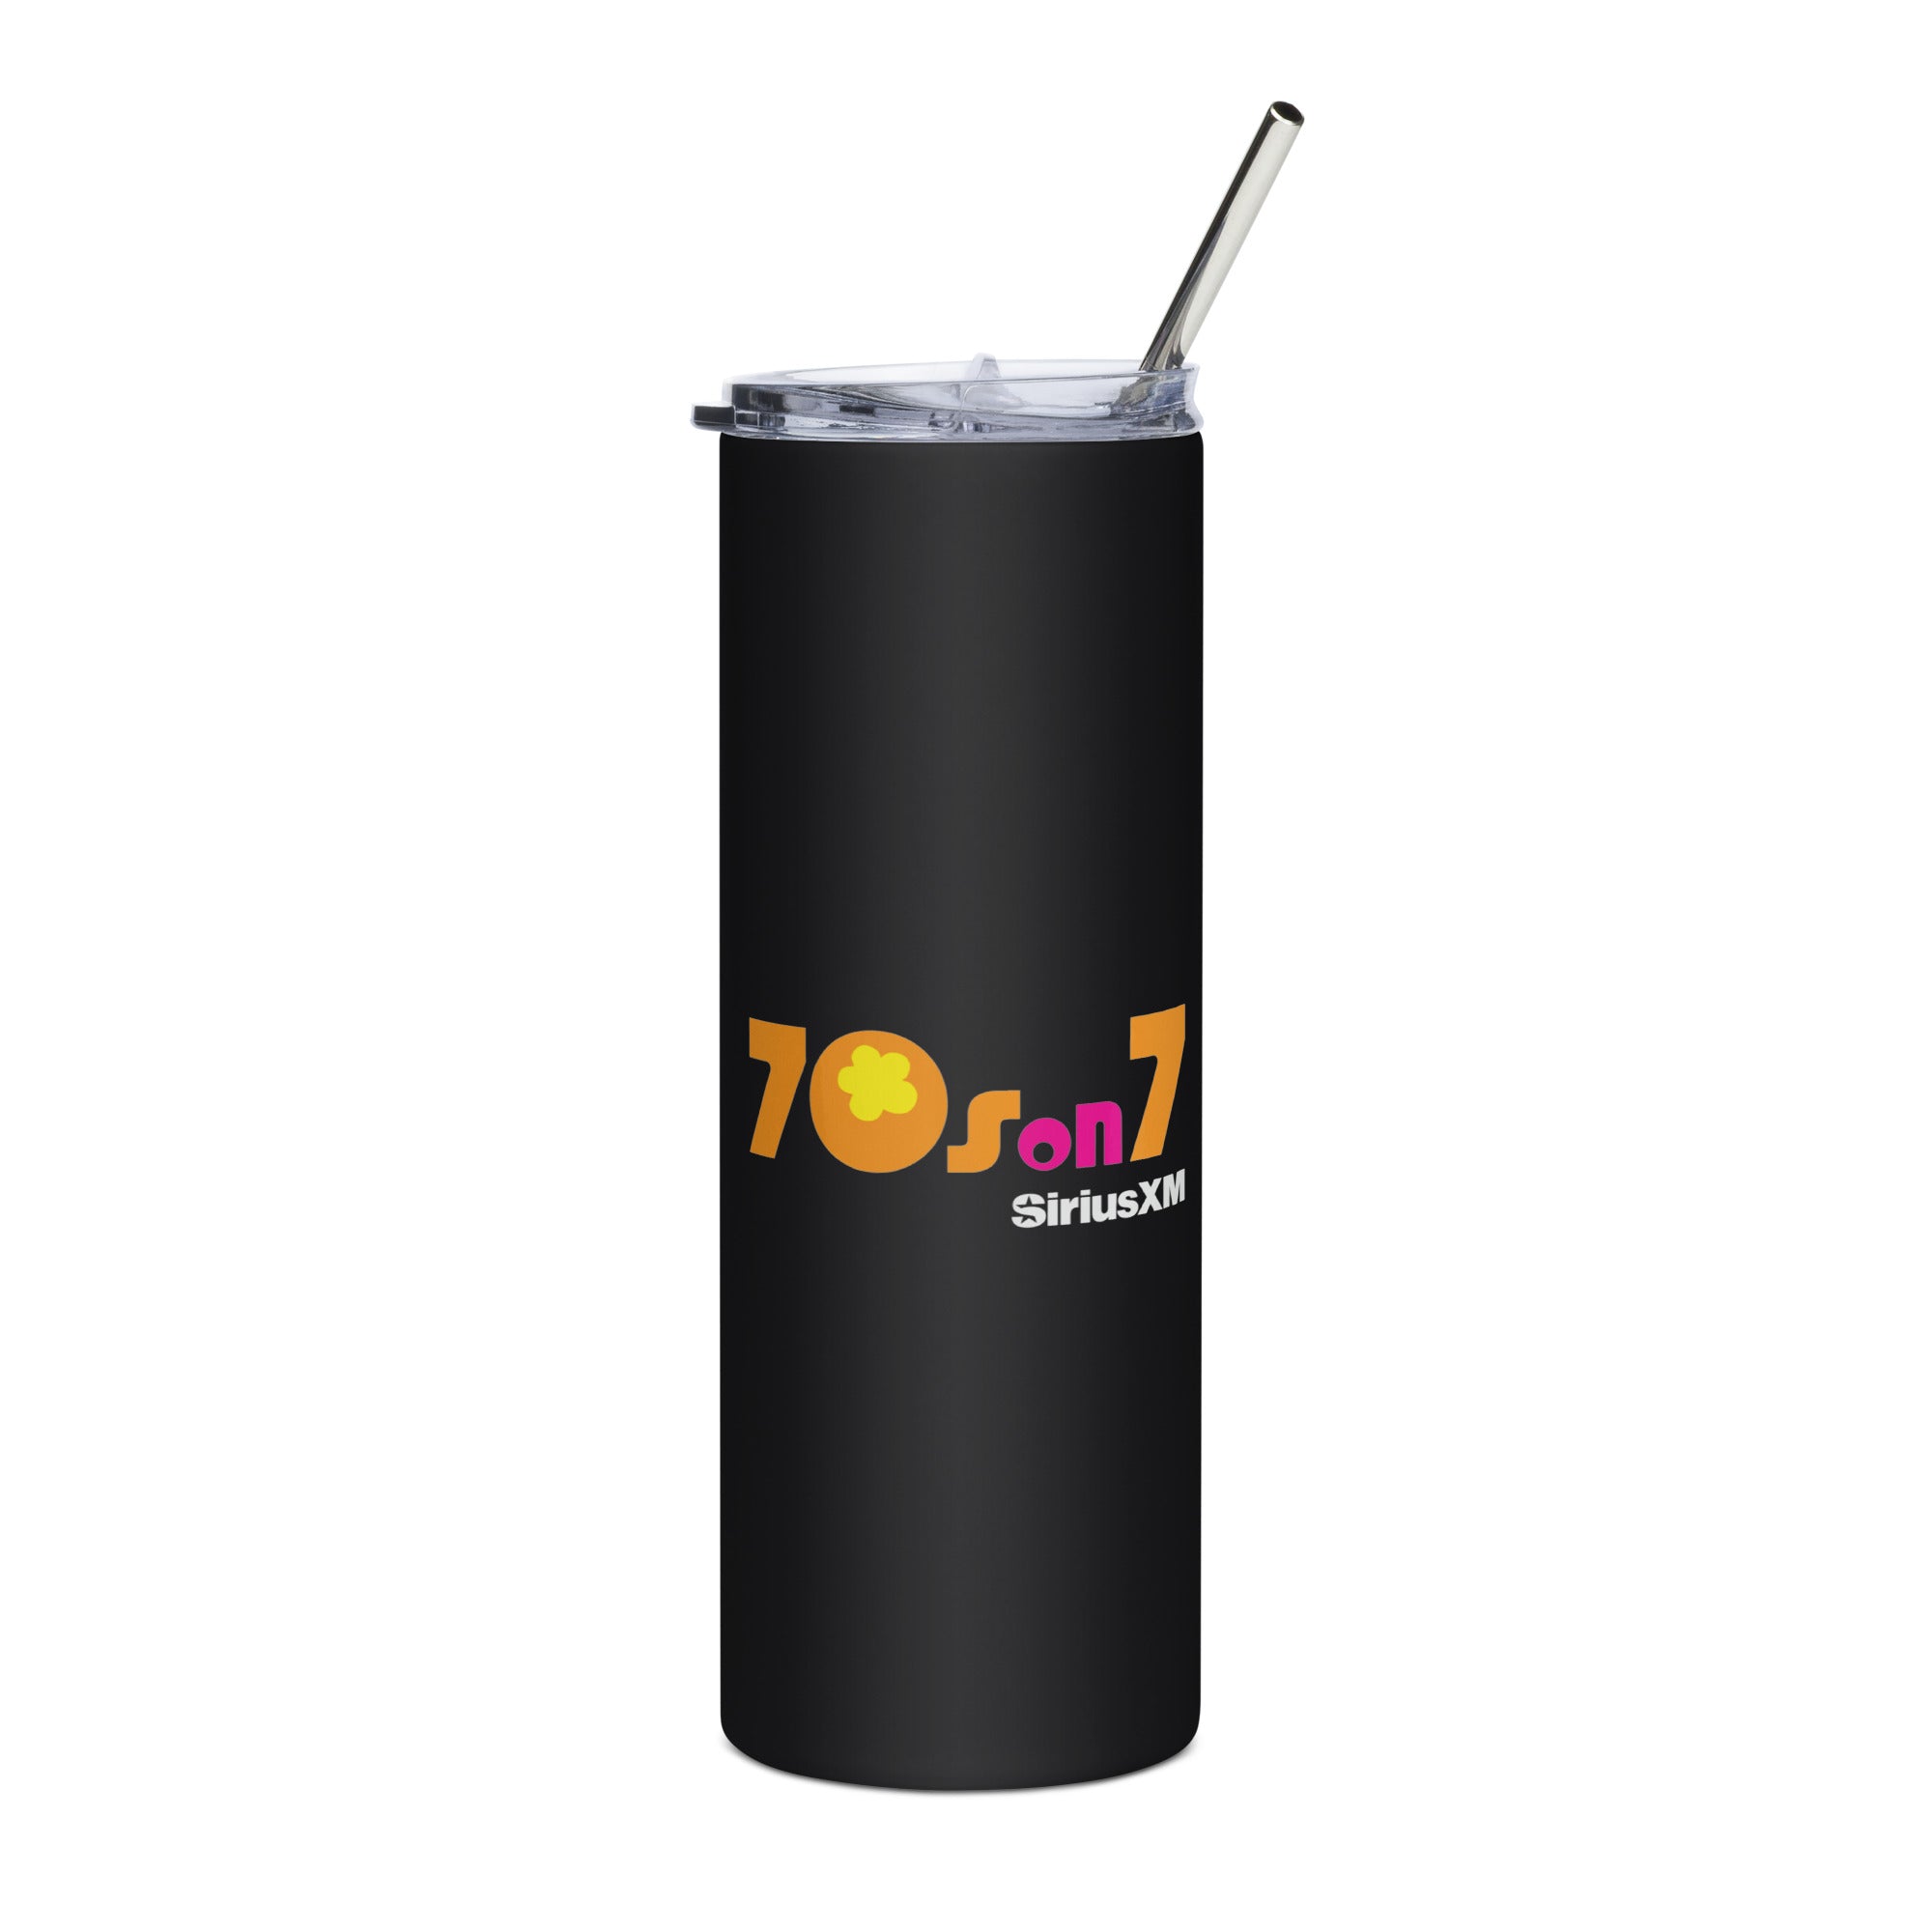 70s on 7: Stainless Tumbler